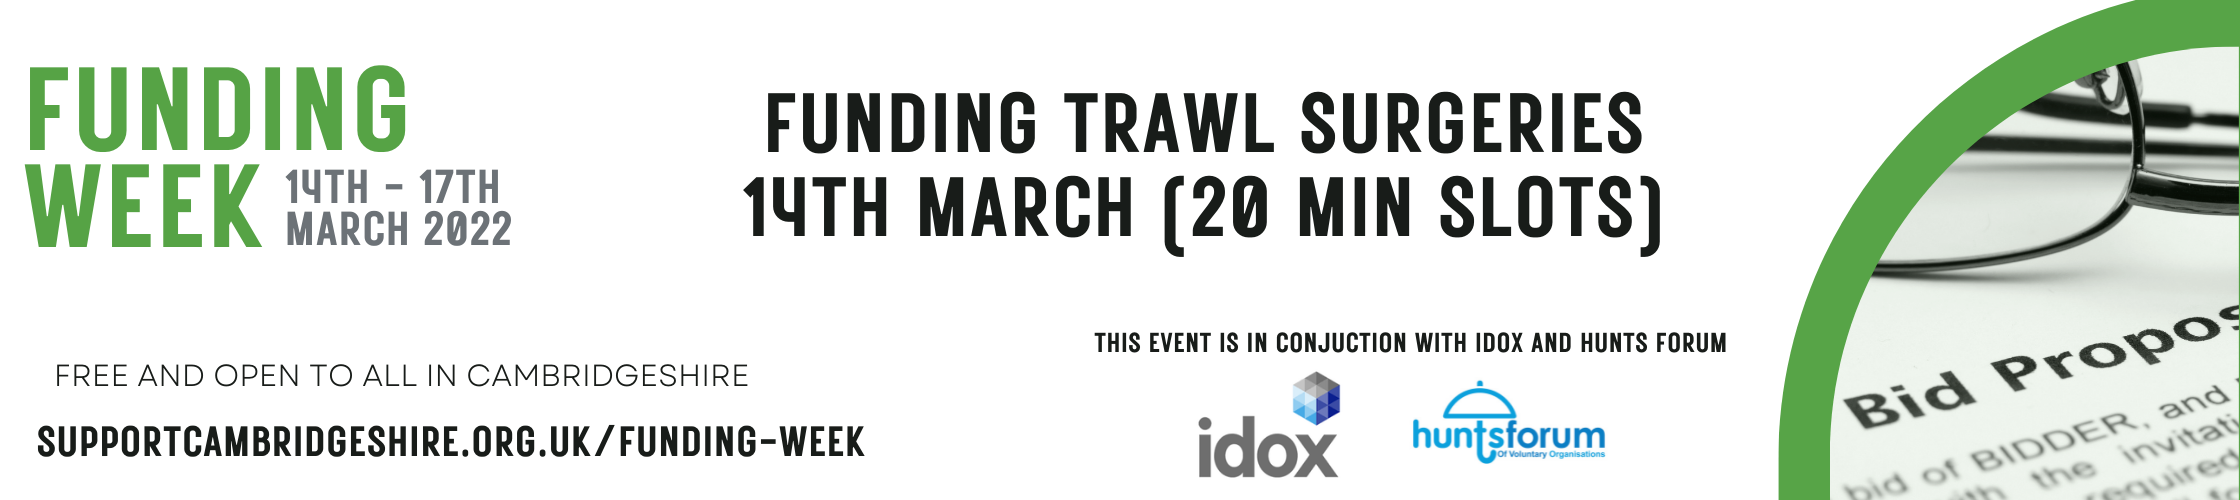 Funding trawl surgeries 14th march 2022